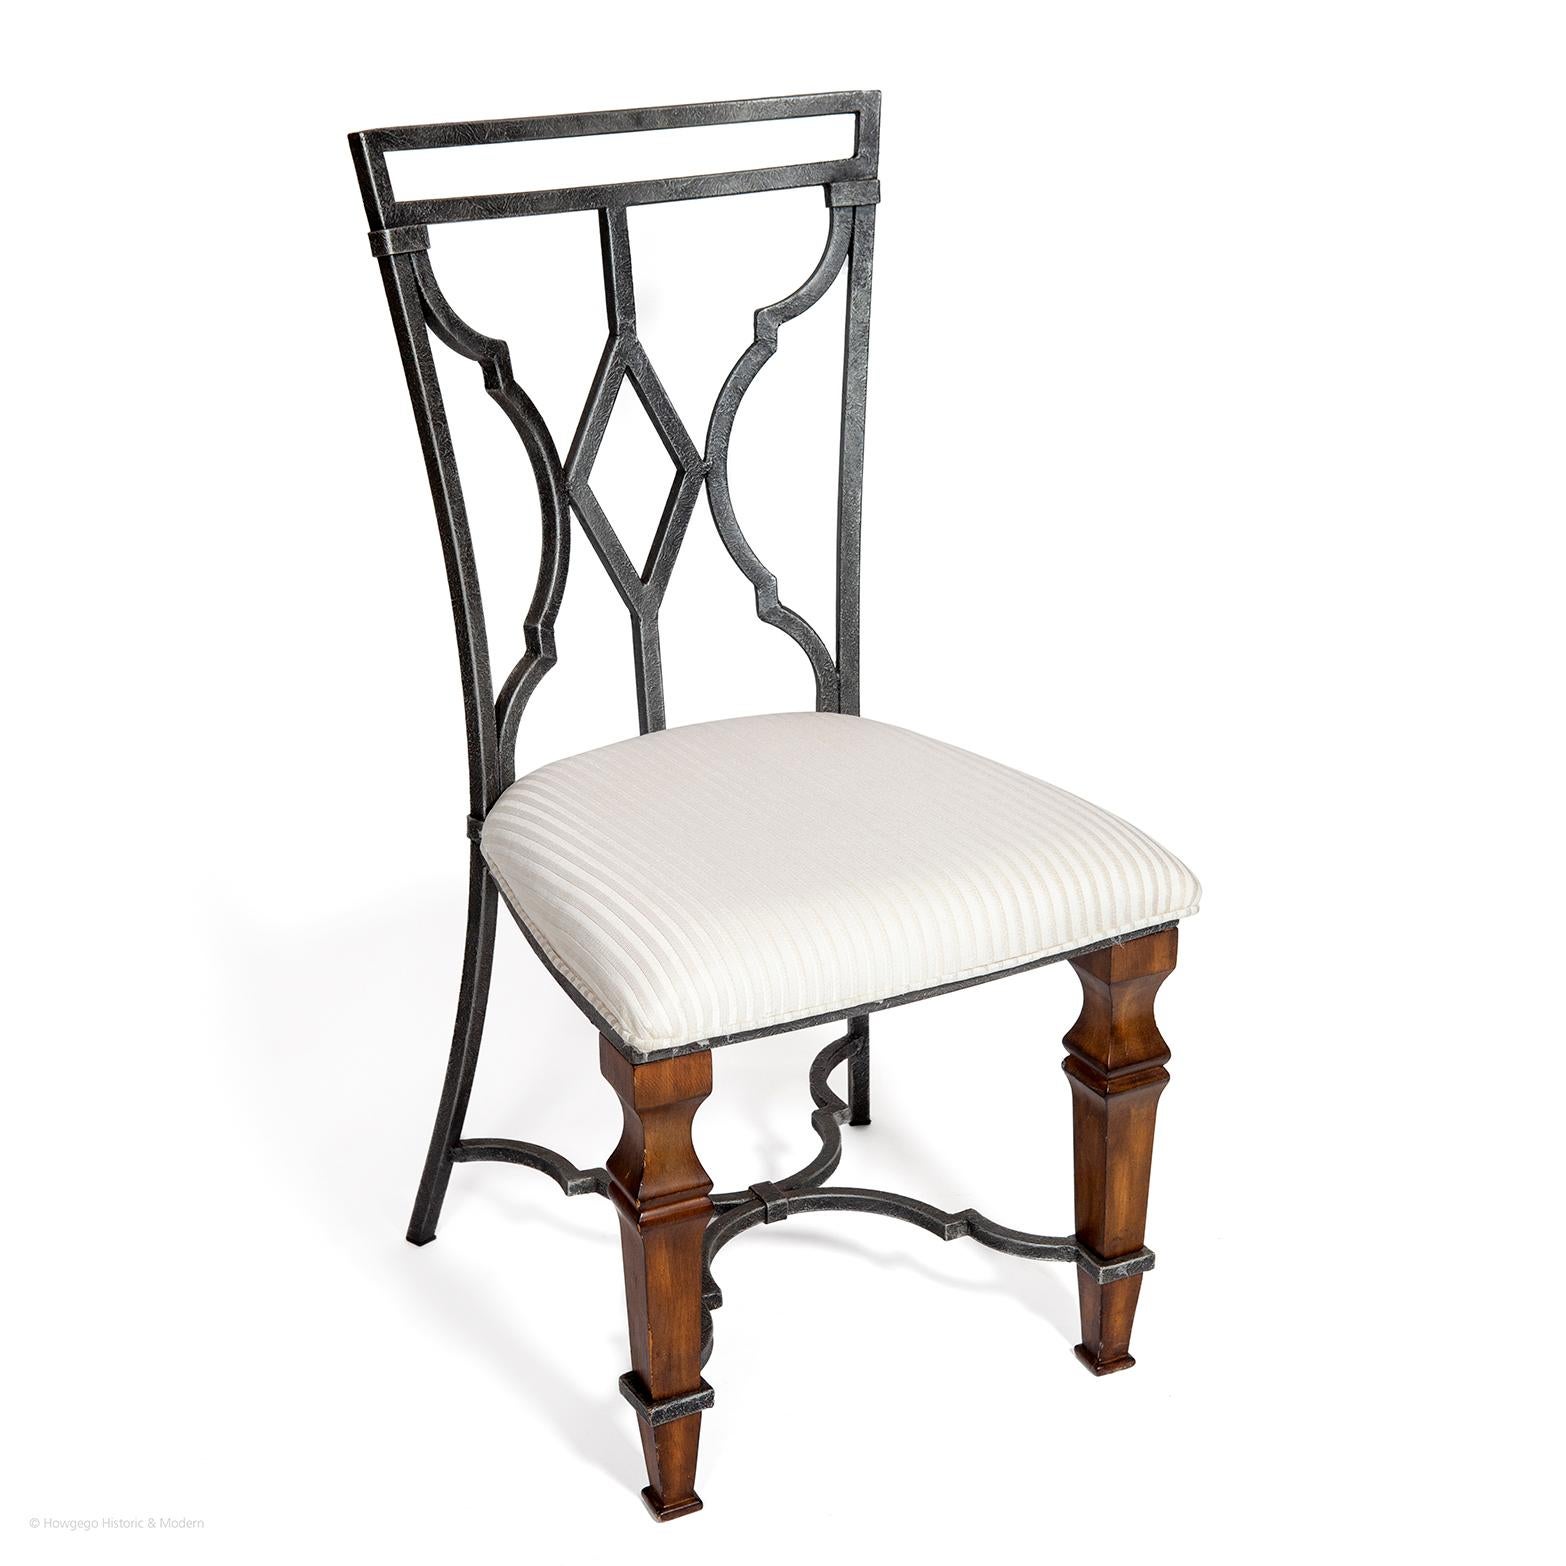 Modern Chairs Set Six Teak Metal Upholstered White For Sale